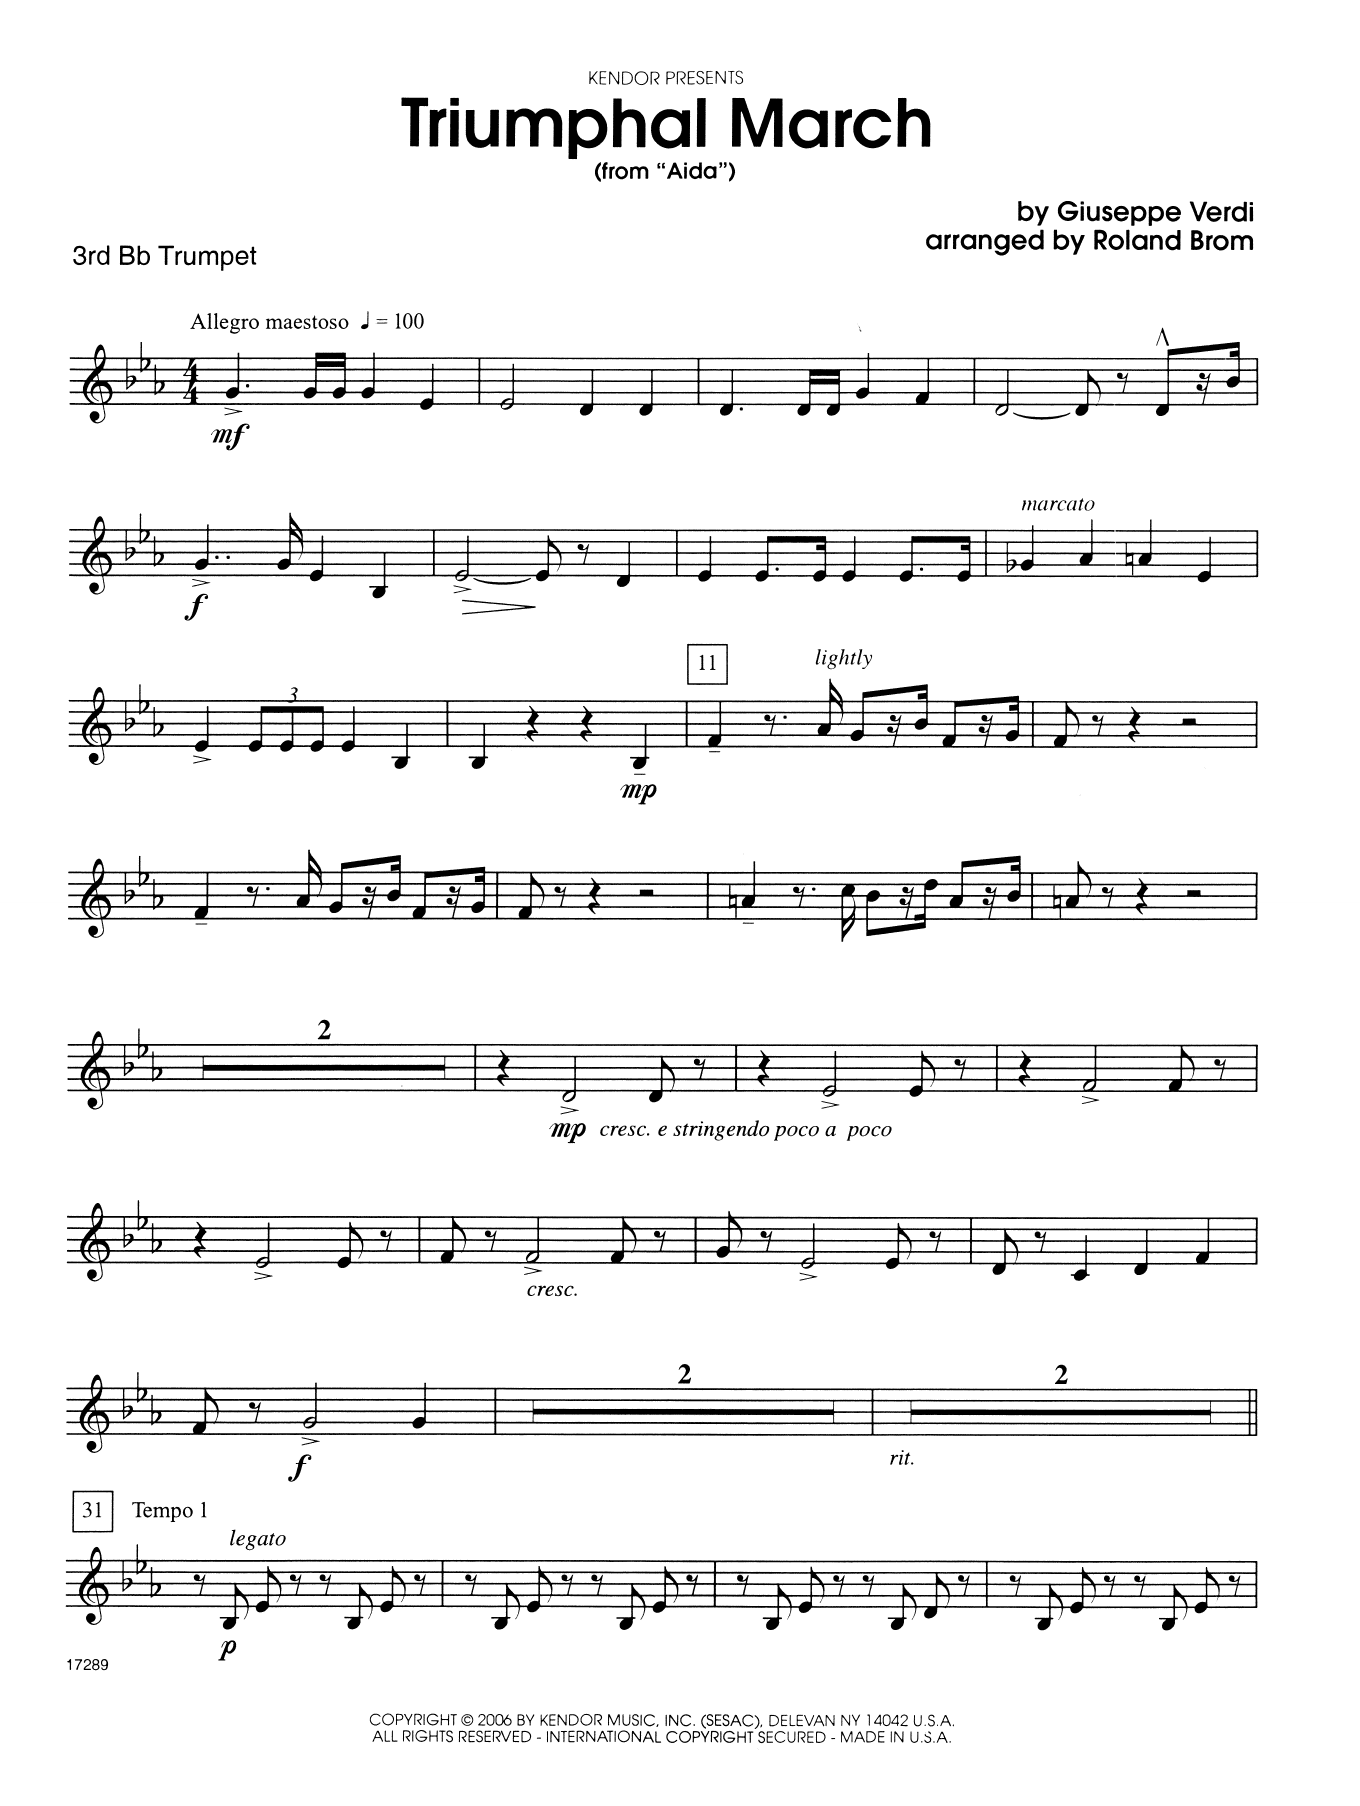 Download Roland Brom Triumphal March (from Aida) - 3rd Bb Tr Sheet Music